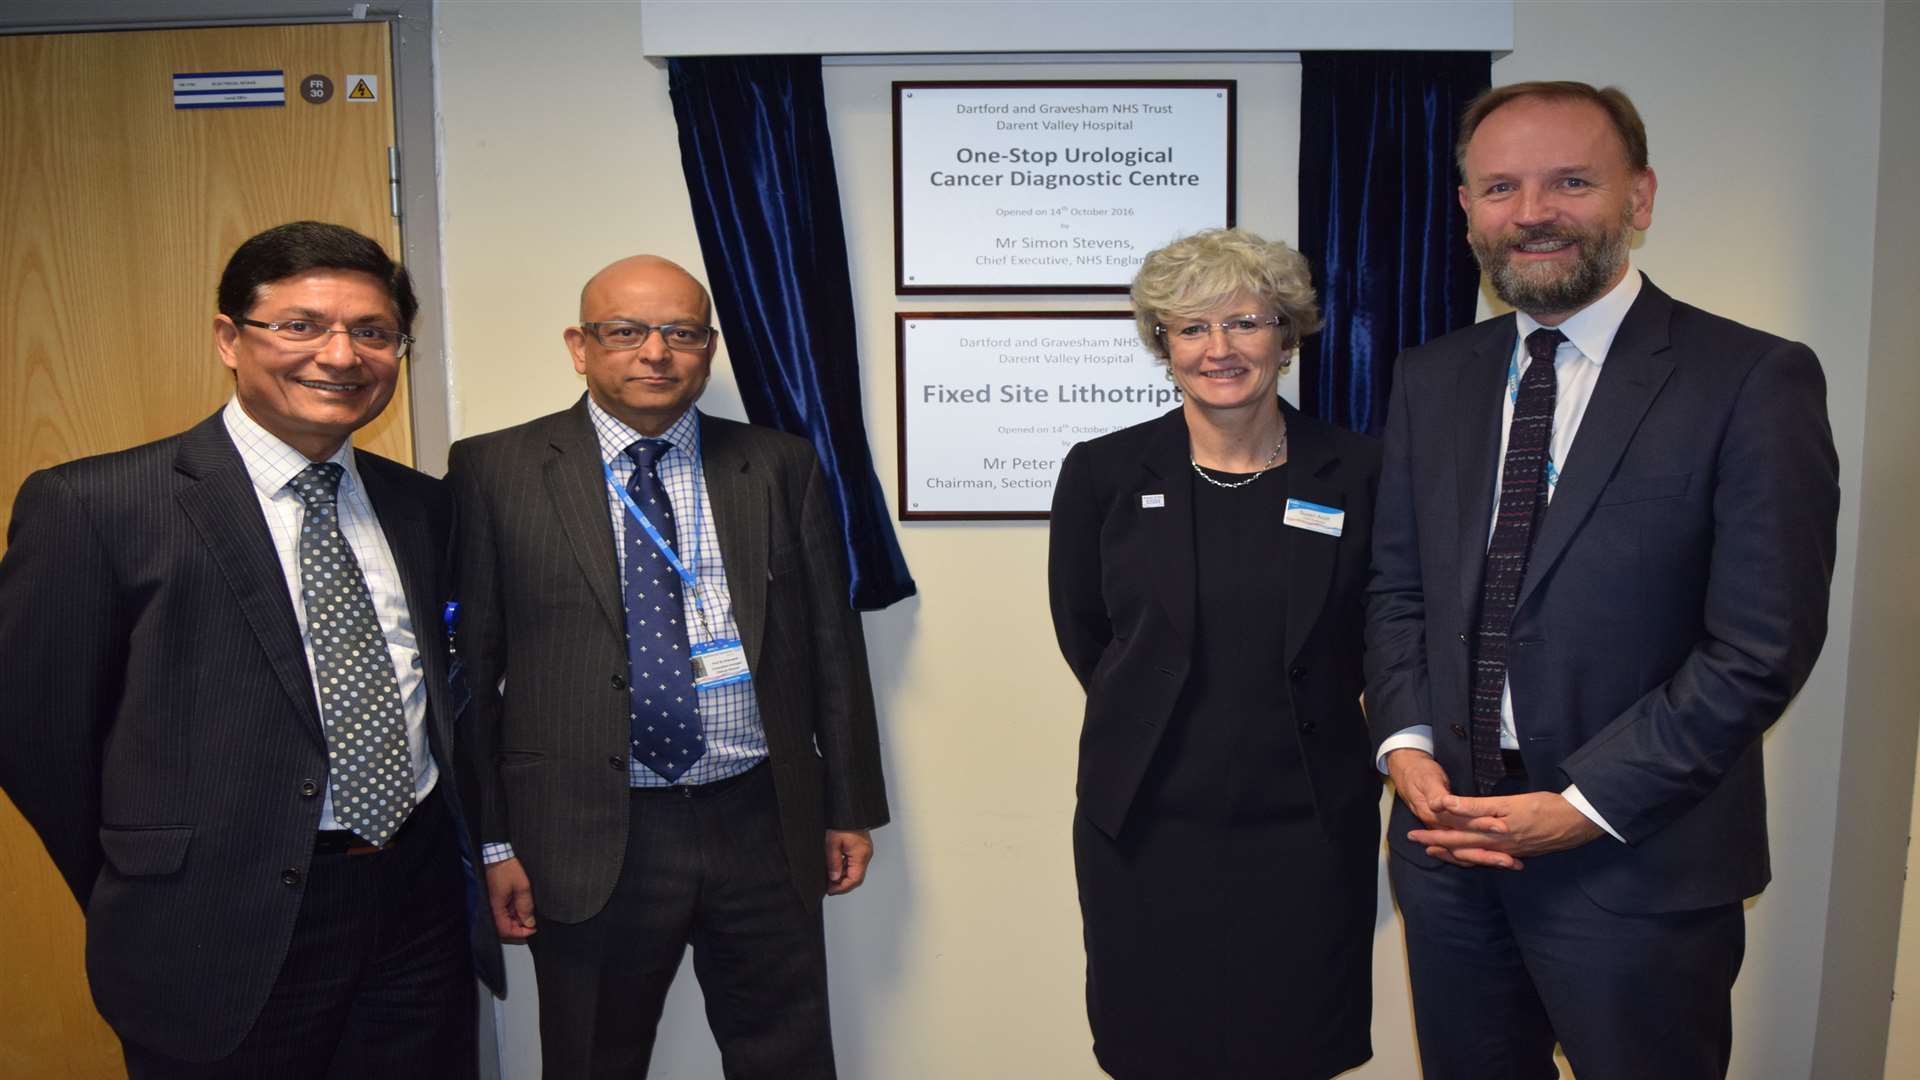 The unveiling of the new centre. Professor Sanjeev Madaan, lead cancer surgeon for Dartford and Gravesham NHS Trust, director of the centre professor Sri Sriprasad, chief executive of the hospital Susan Acott and Simon Stevens, head of NHS England.